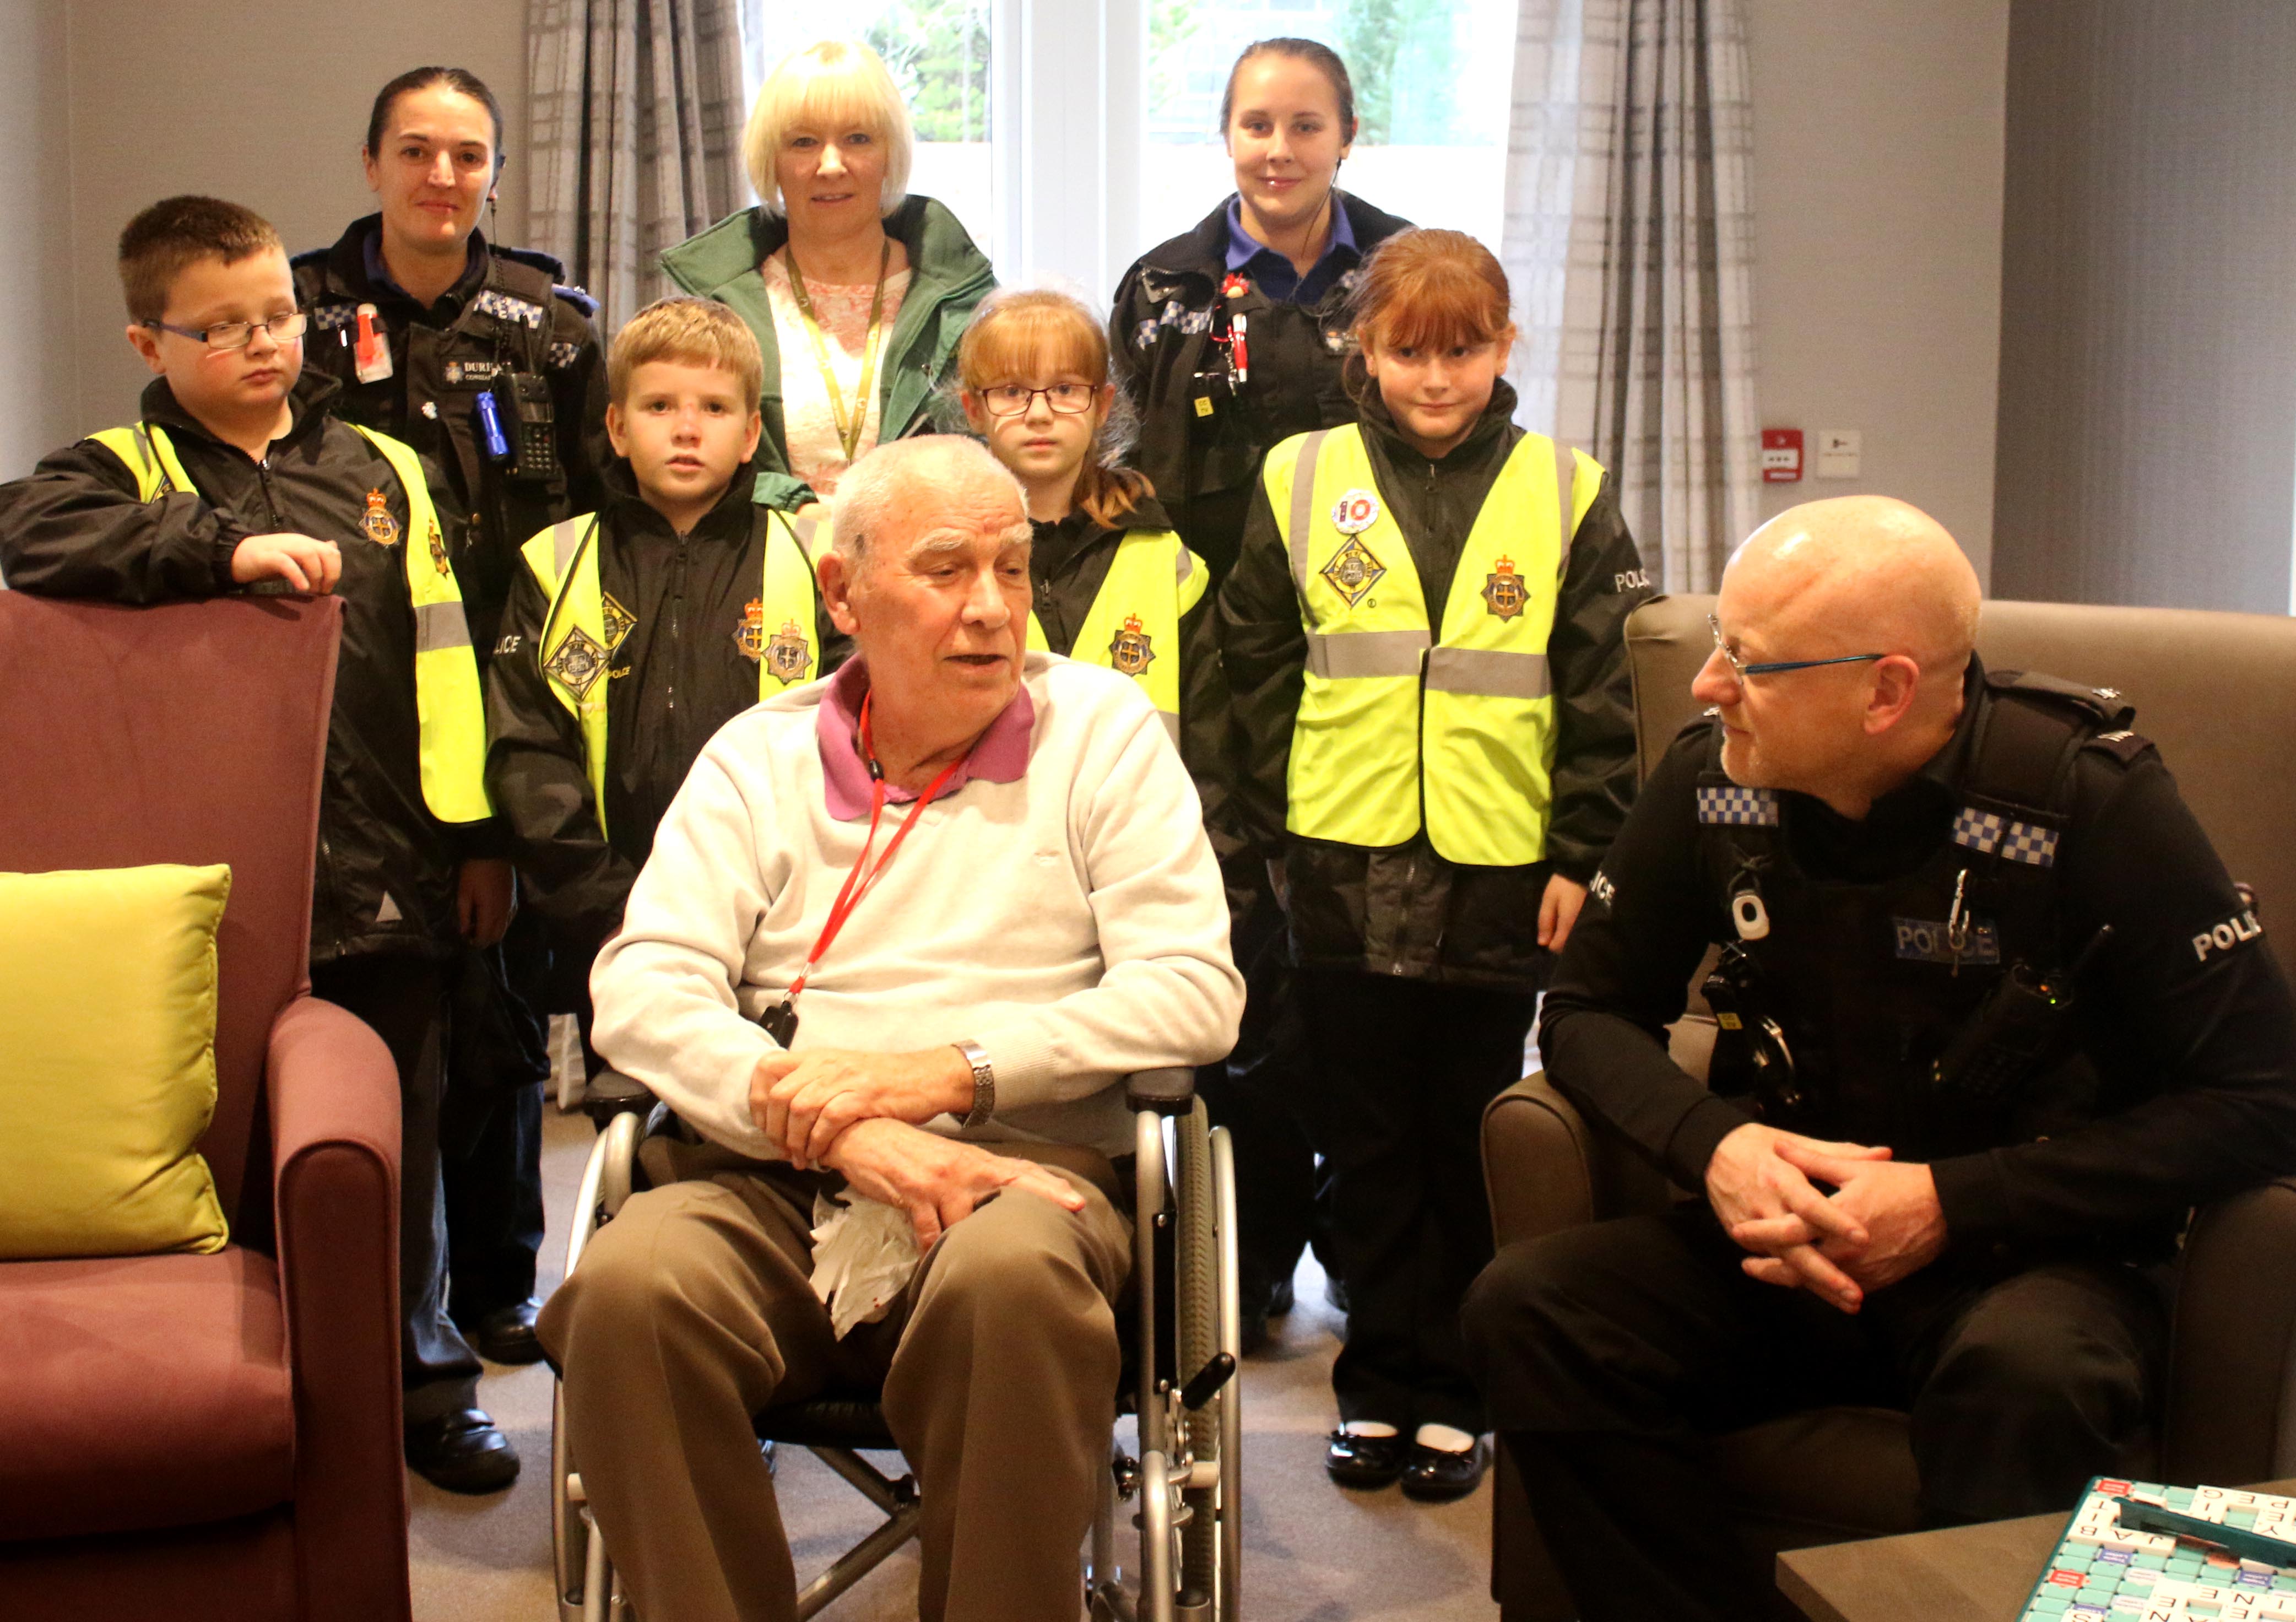 Retired Policeman Meets Mini Police on Site of Former Police Station